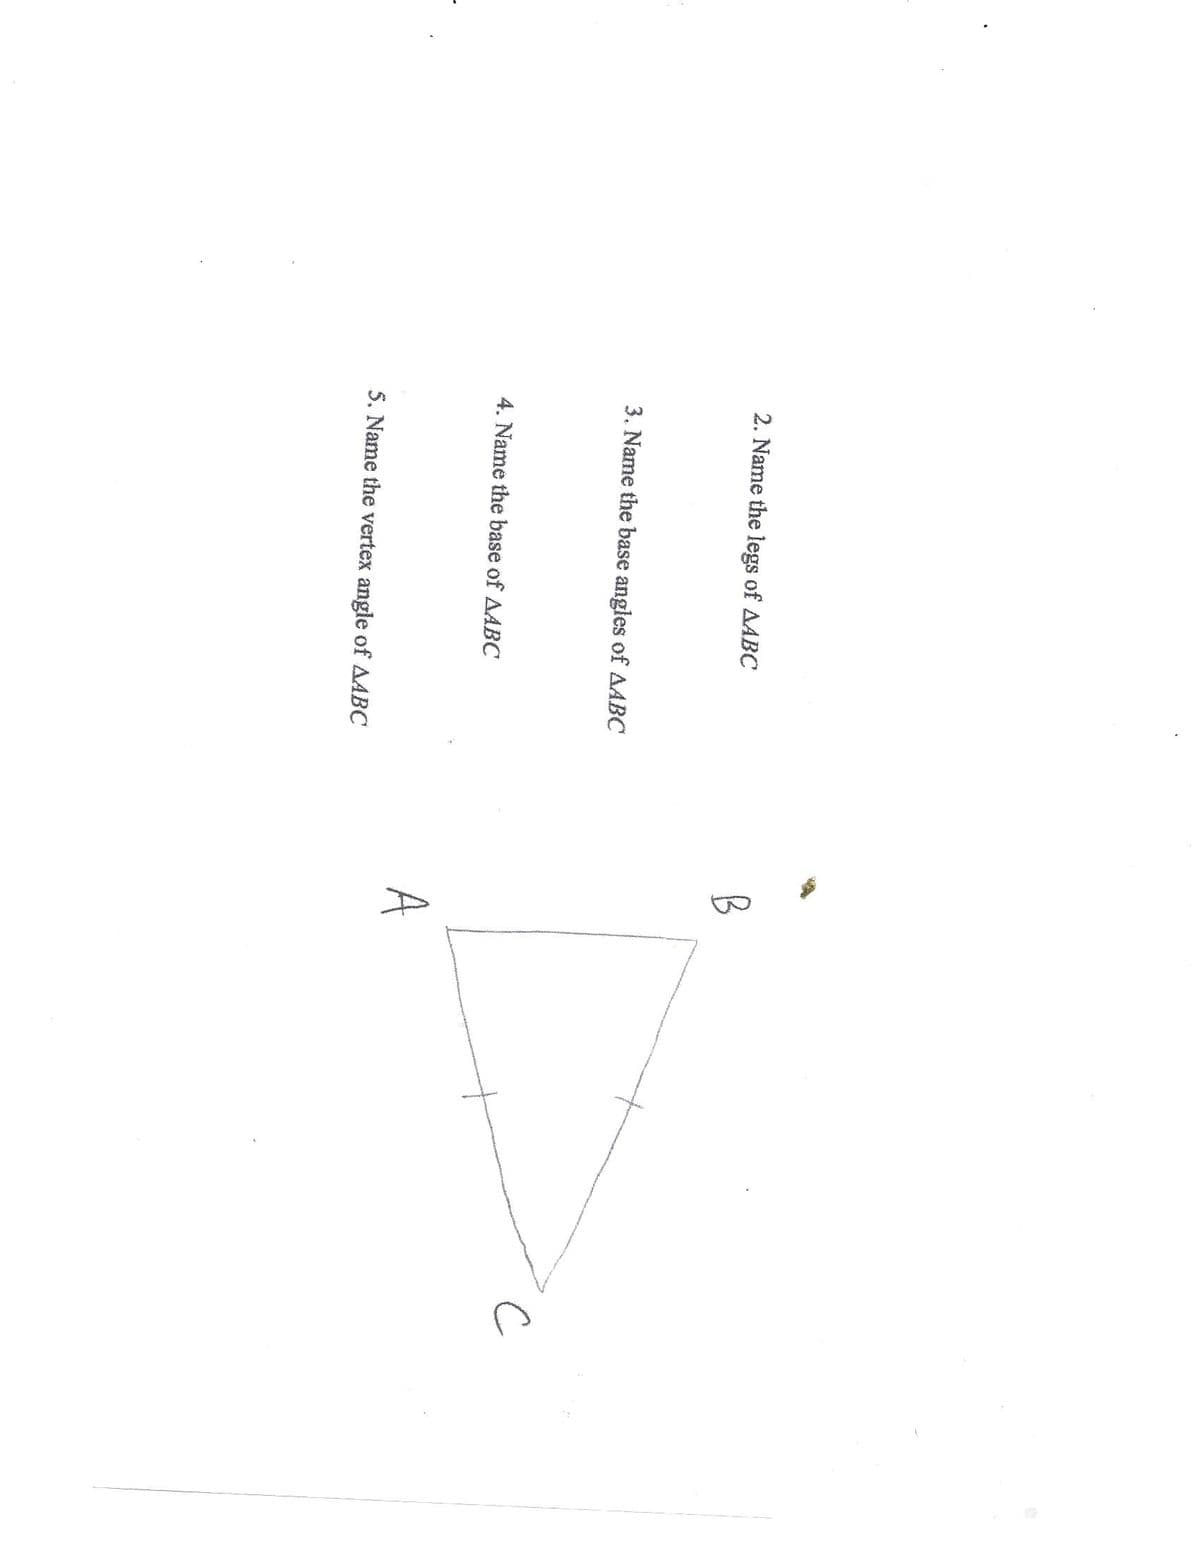 2. Name the legs of AABC
B
3. Name the base angles of AABC
4. Name the base of AABC
A
5. Name the vertex angle of AABC
